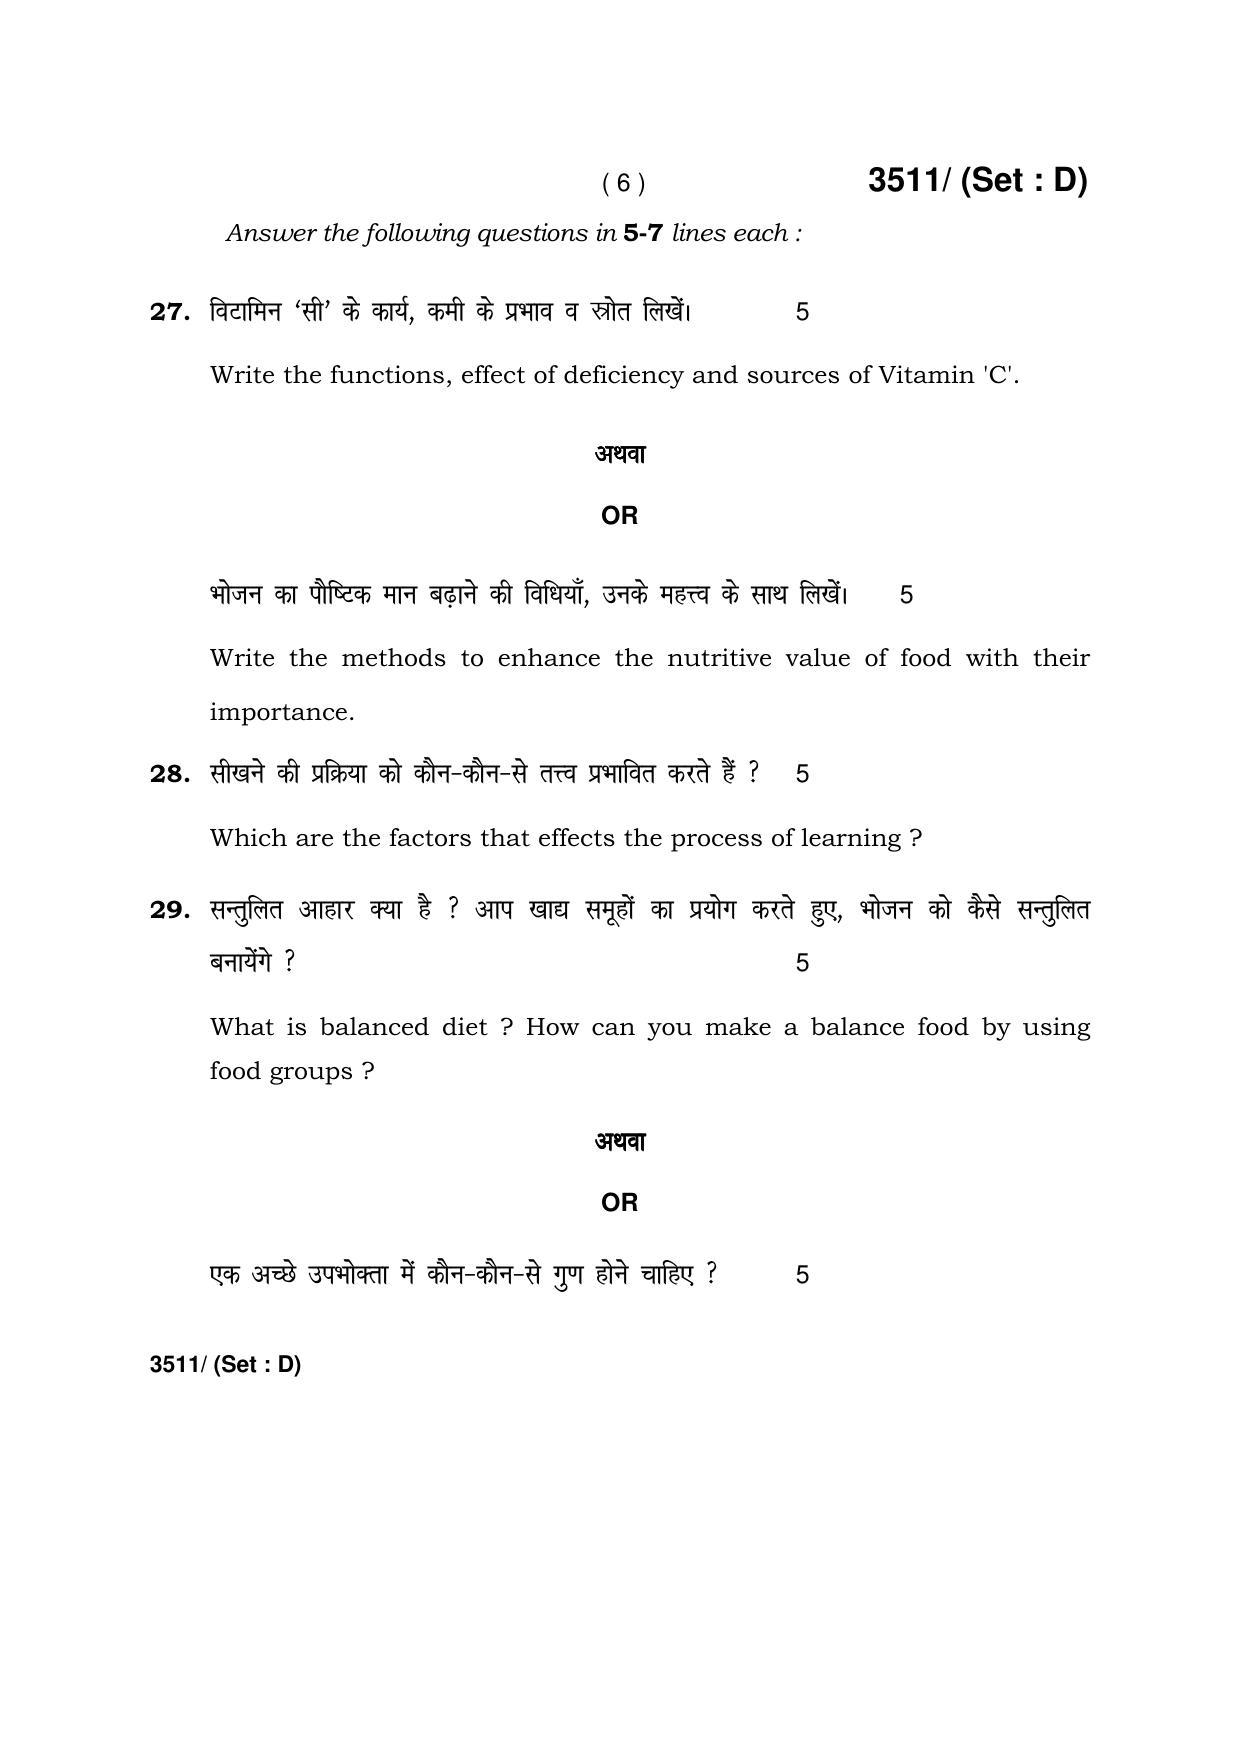 Haryana Board HBSE Class 10 Home Science -D 2018 Question Paper - Page 6